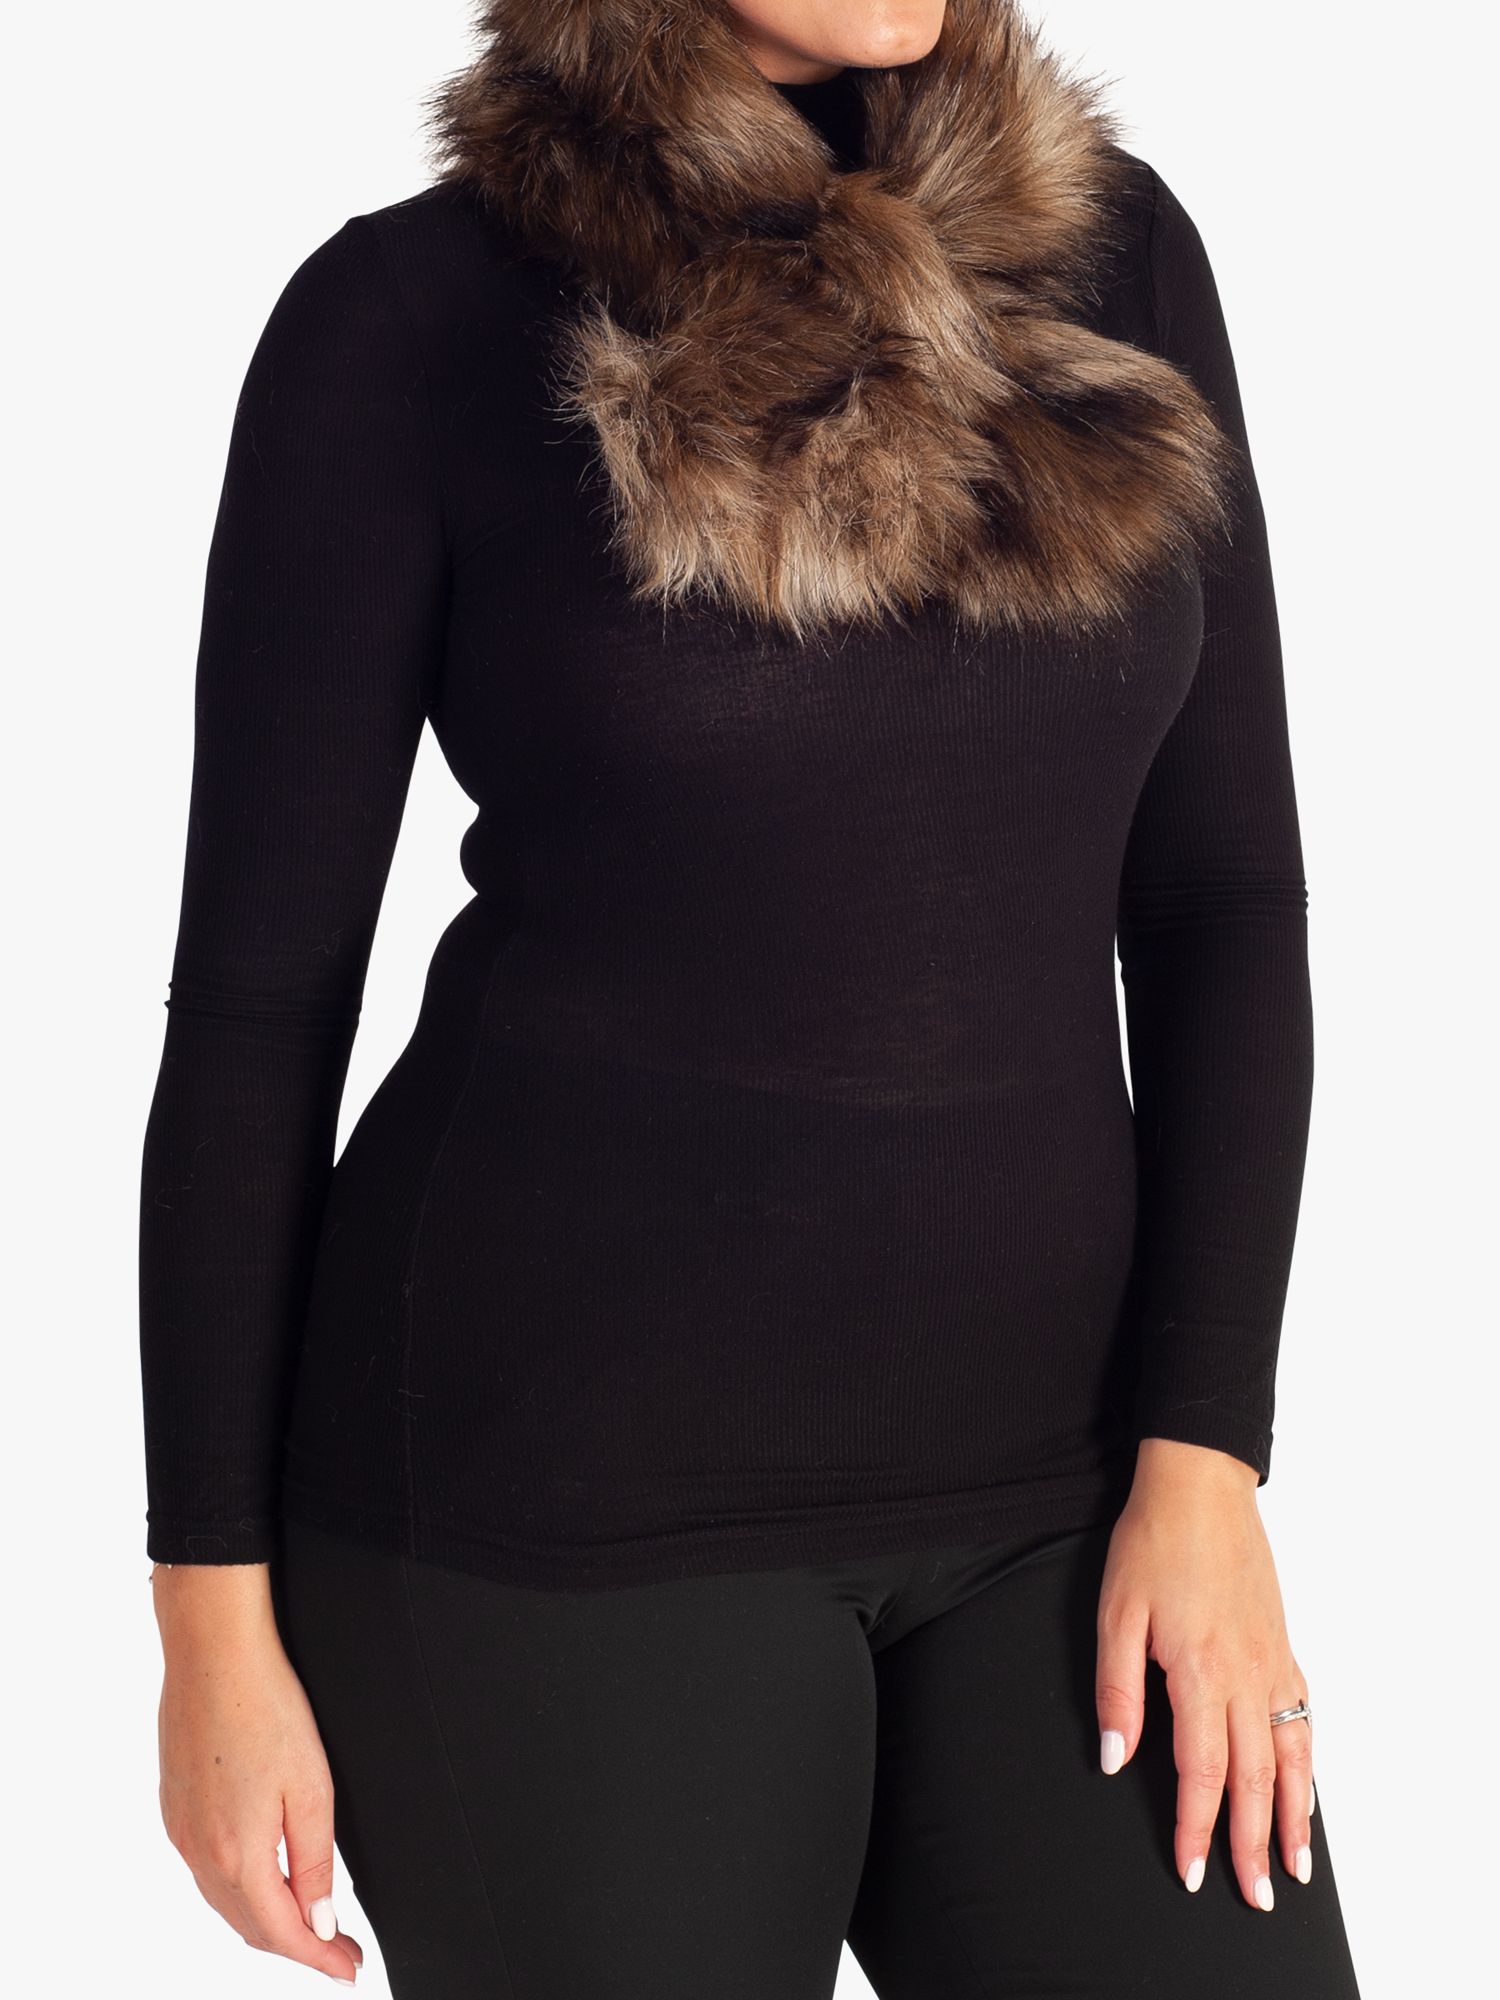 Buy chesca Faux Fur Scarf Online at johnlewis.com